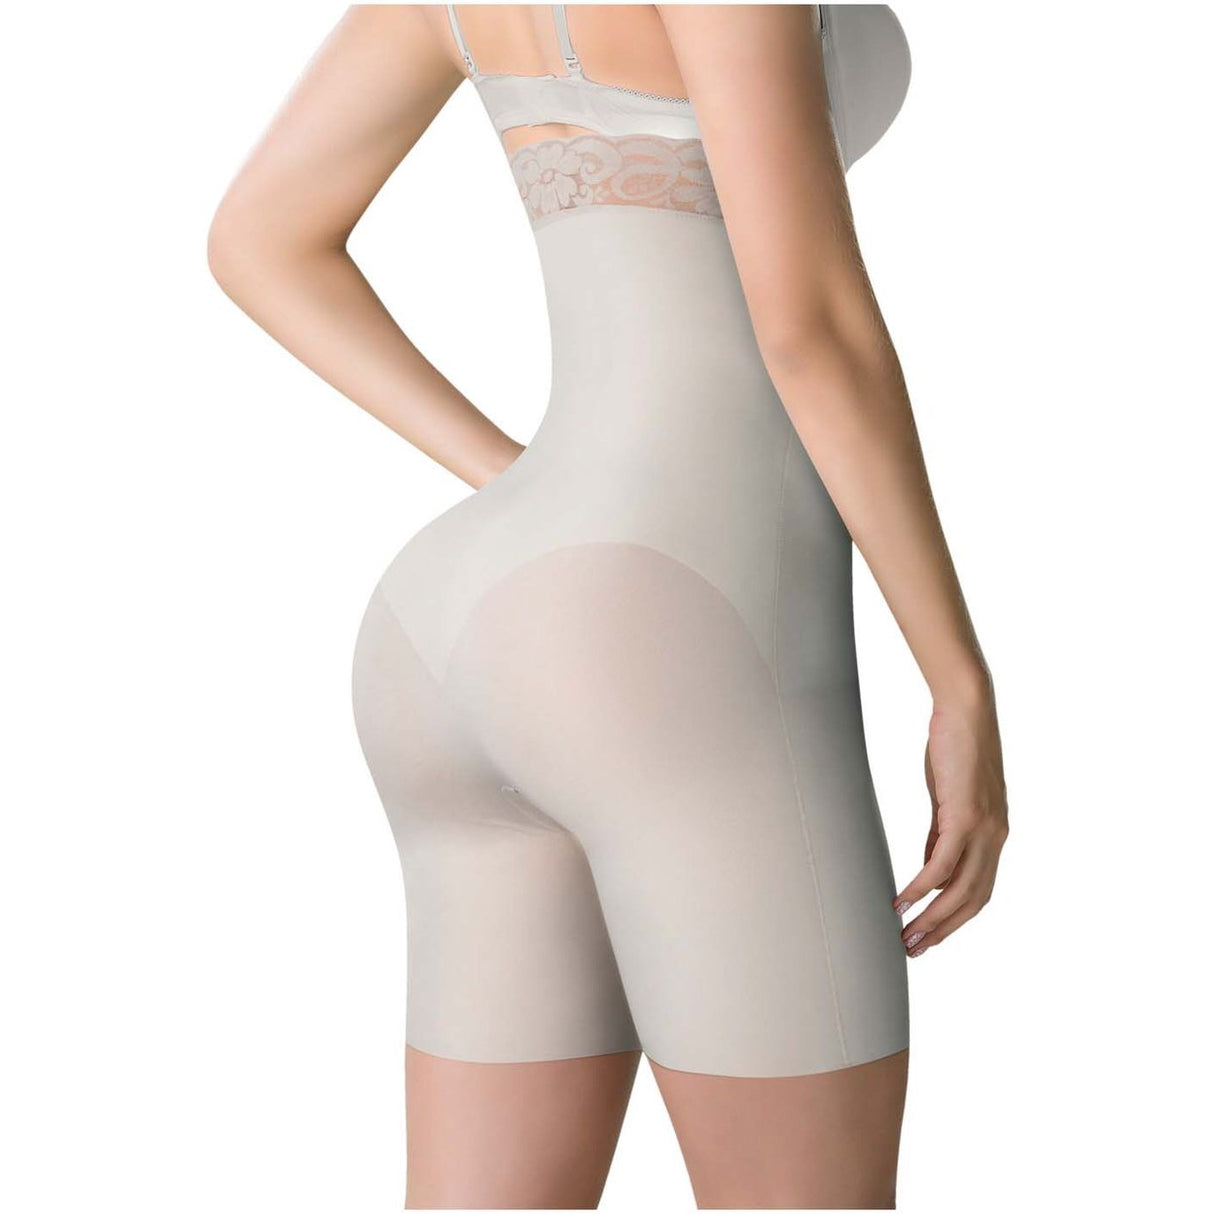 Strapless girdle  Shapes the waist and flattens the abdomen